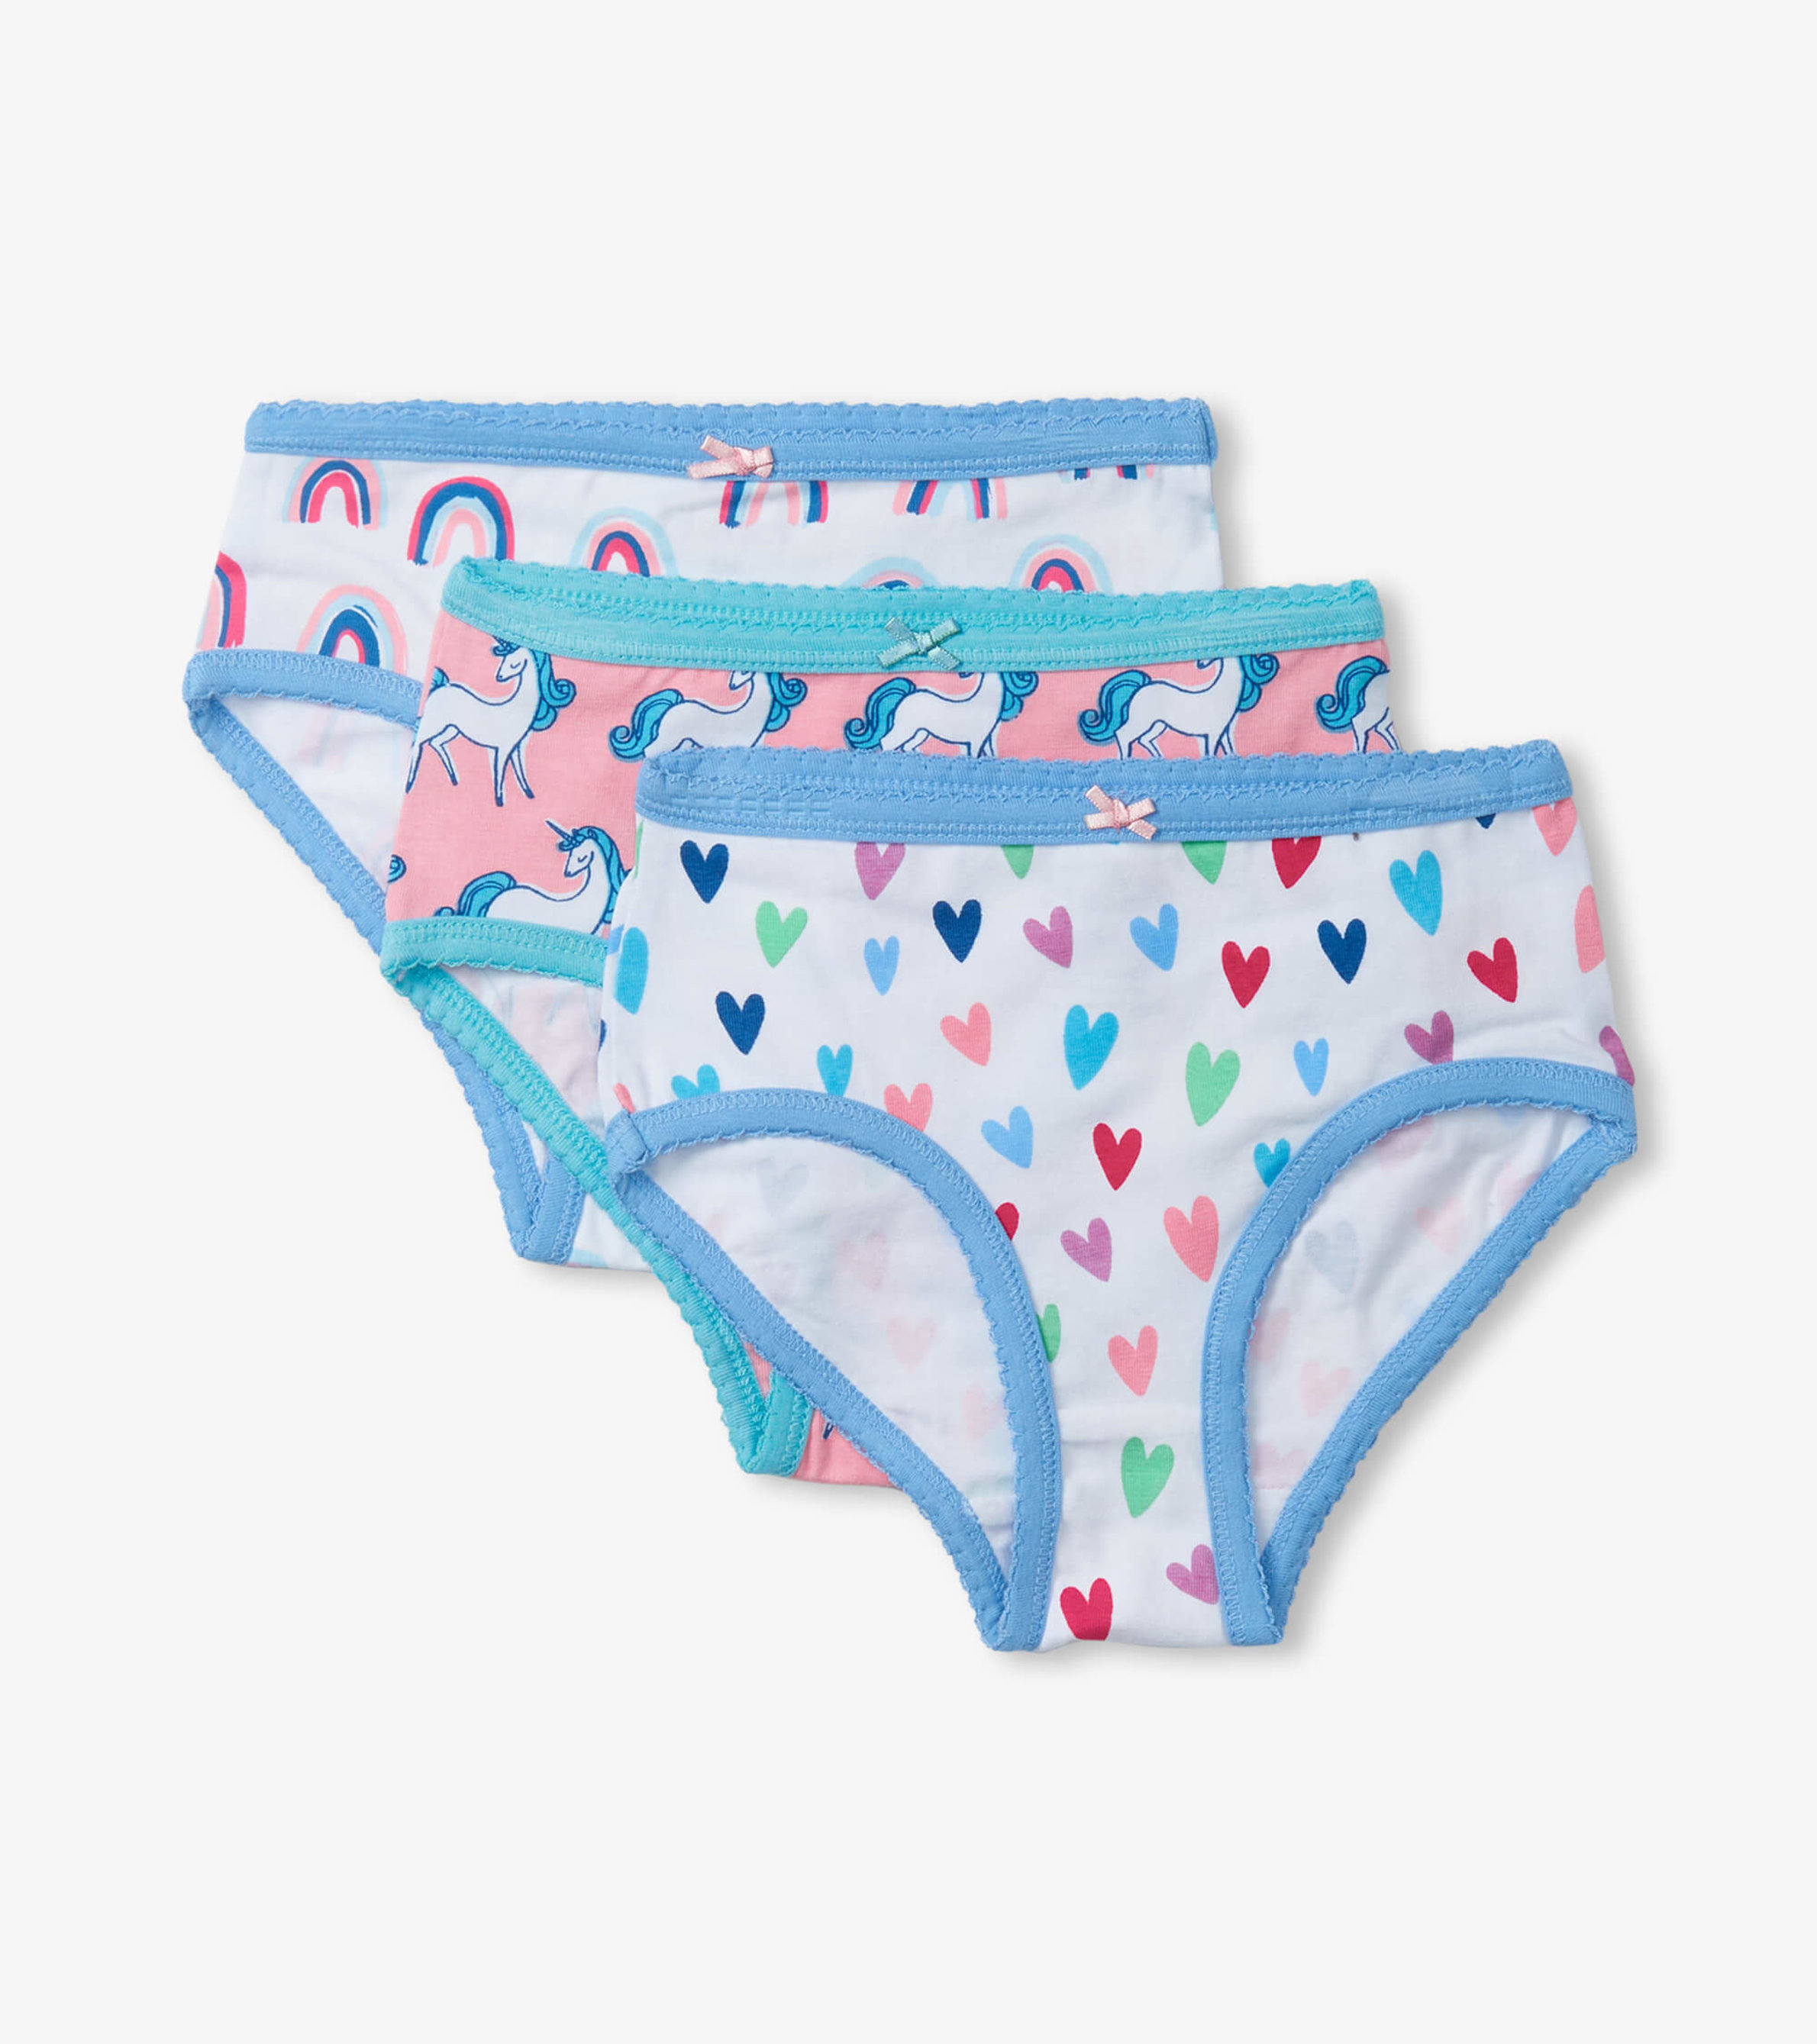 Simply Life  Girls Underwear Shortie (Thin Band) (Pack of 3)